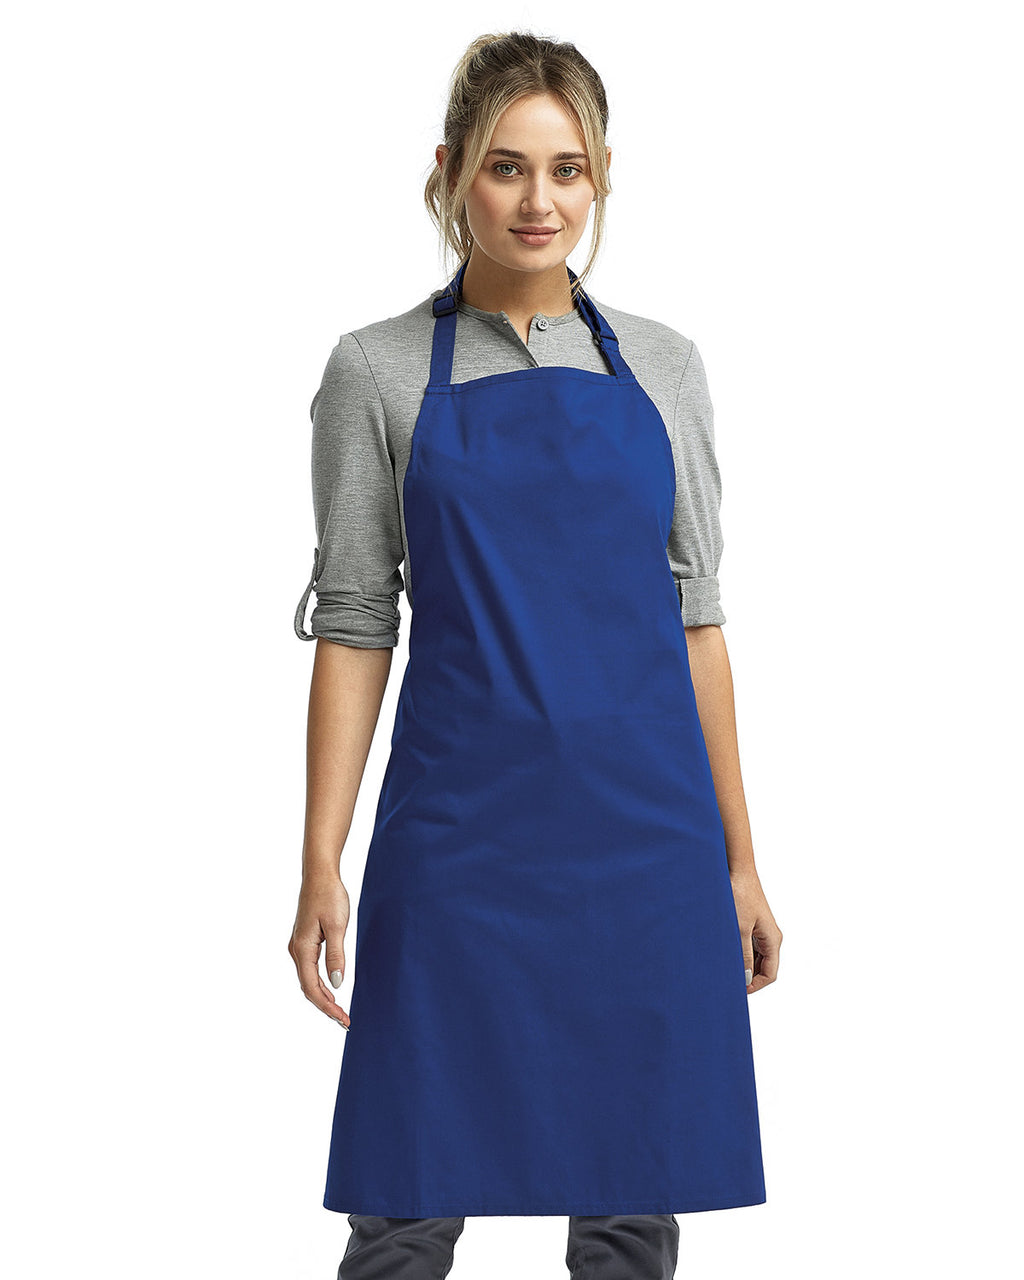 RP150-Artisan Collection by Reprime "Colours" Sustainable Bib Apron